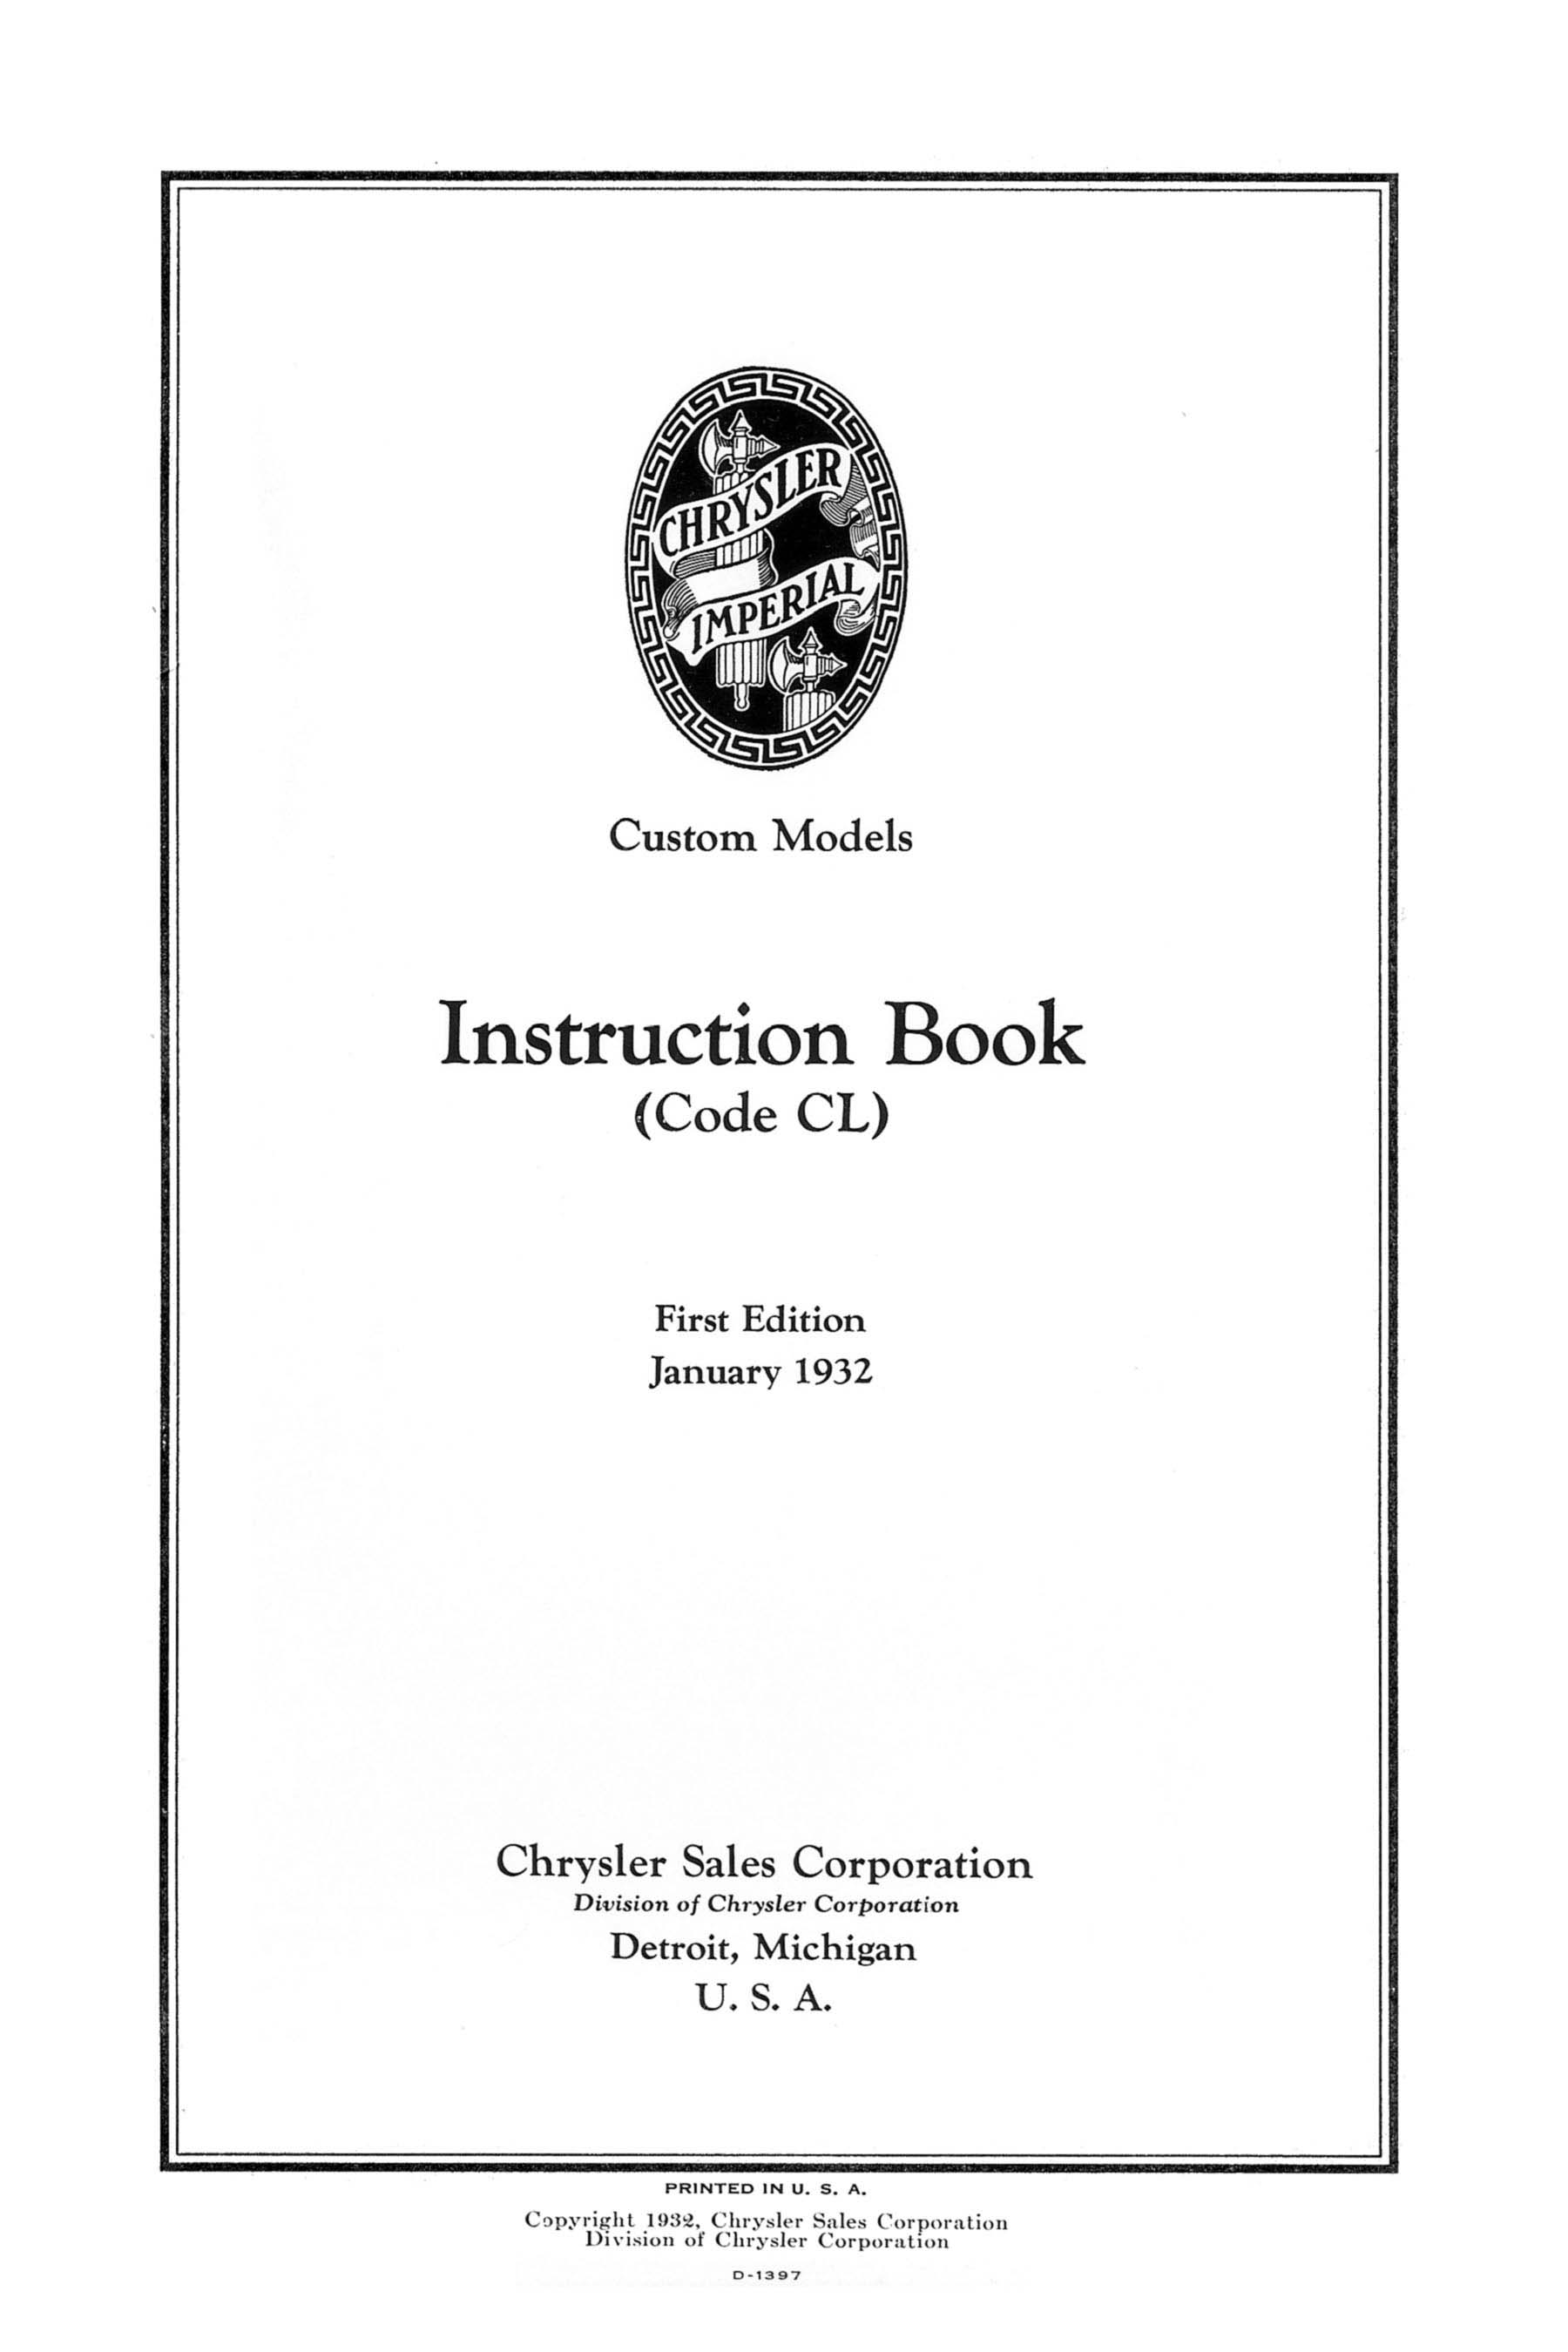 1932 Imperial Instruction Book-001